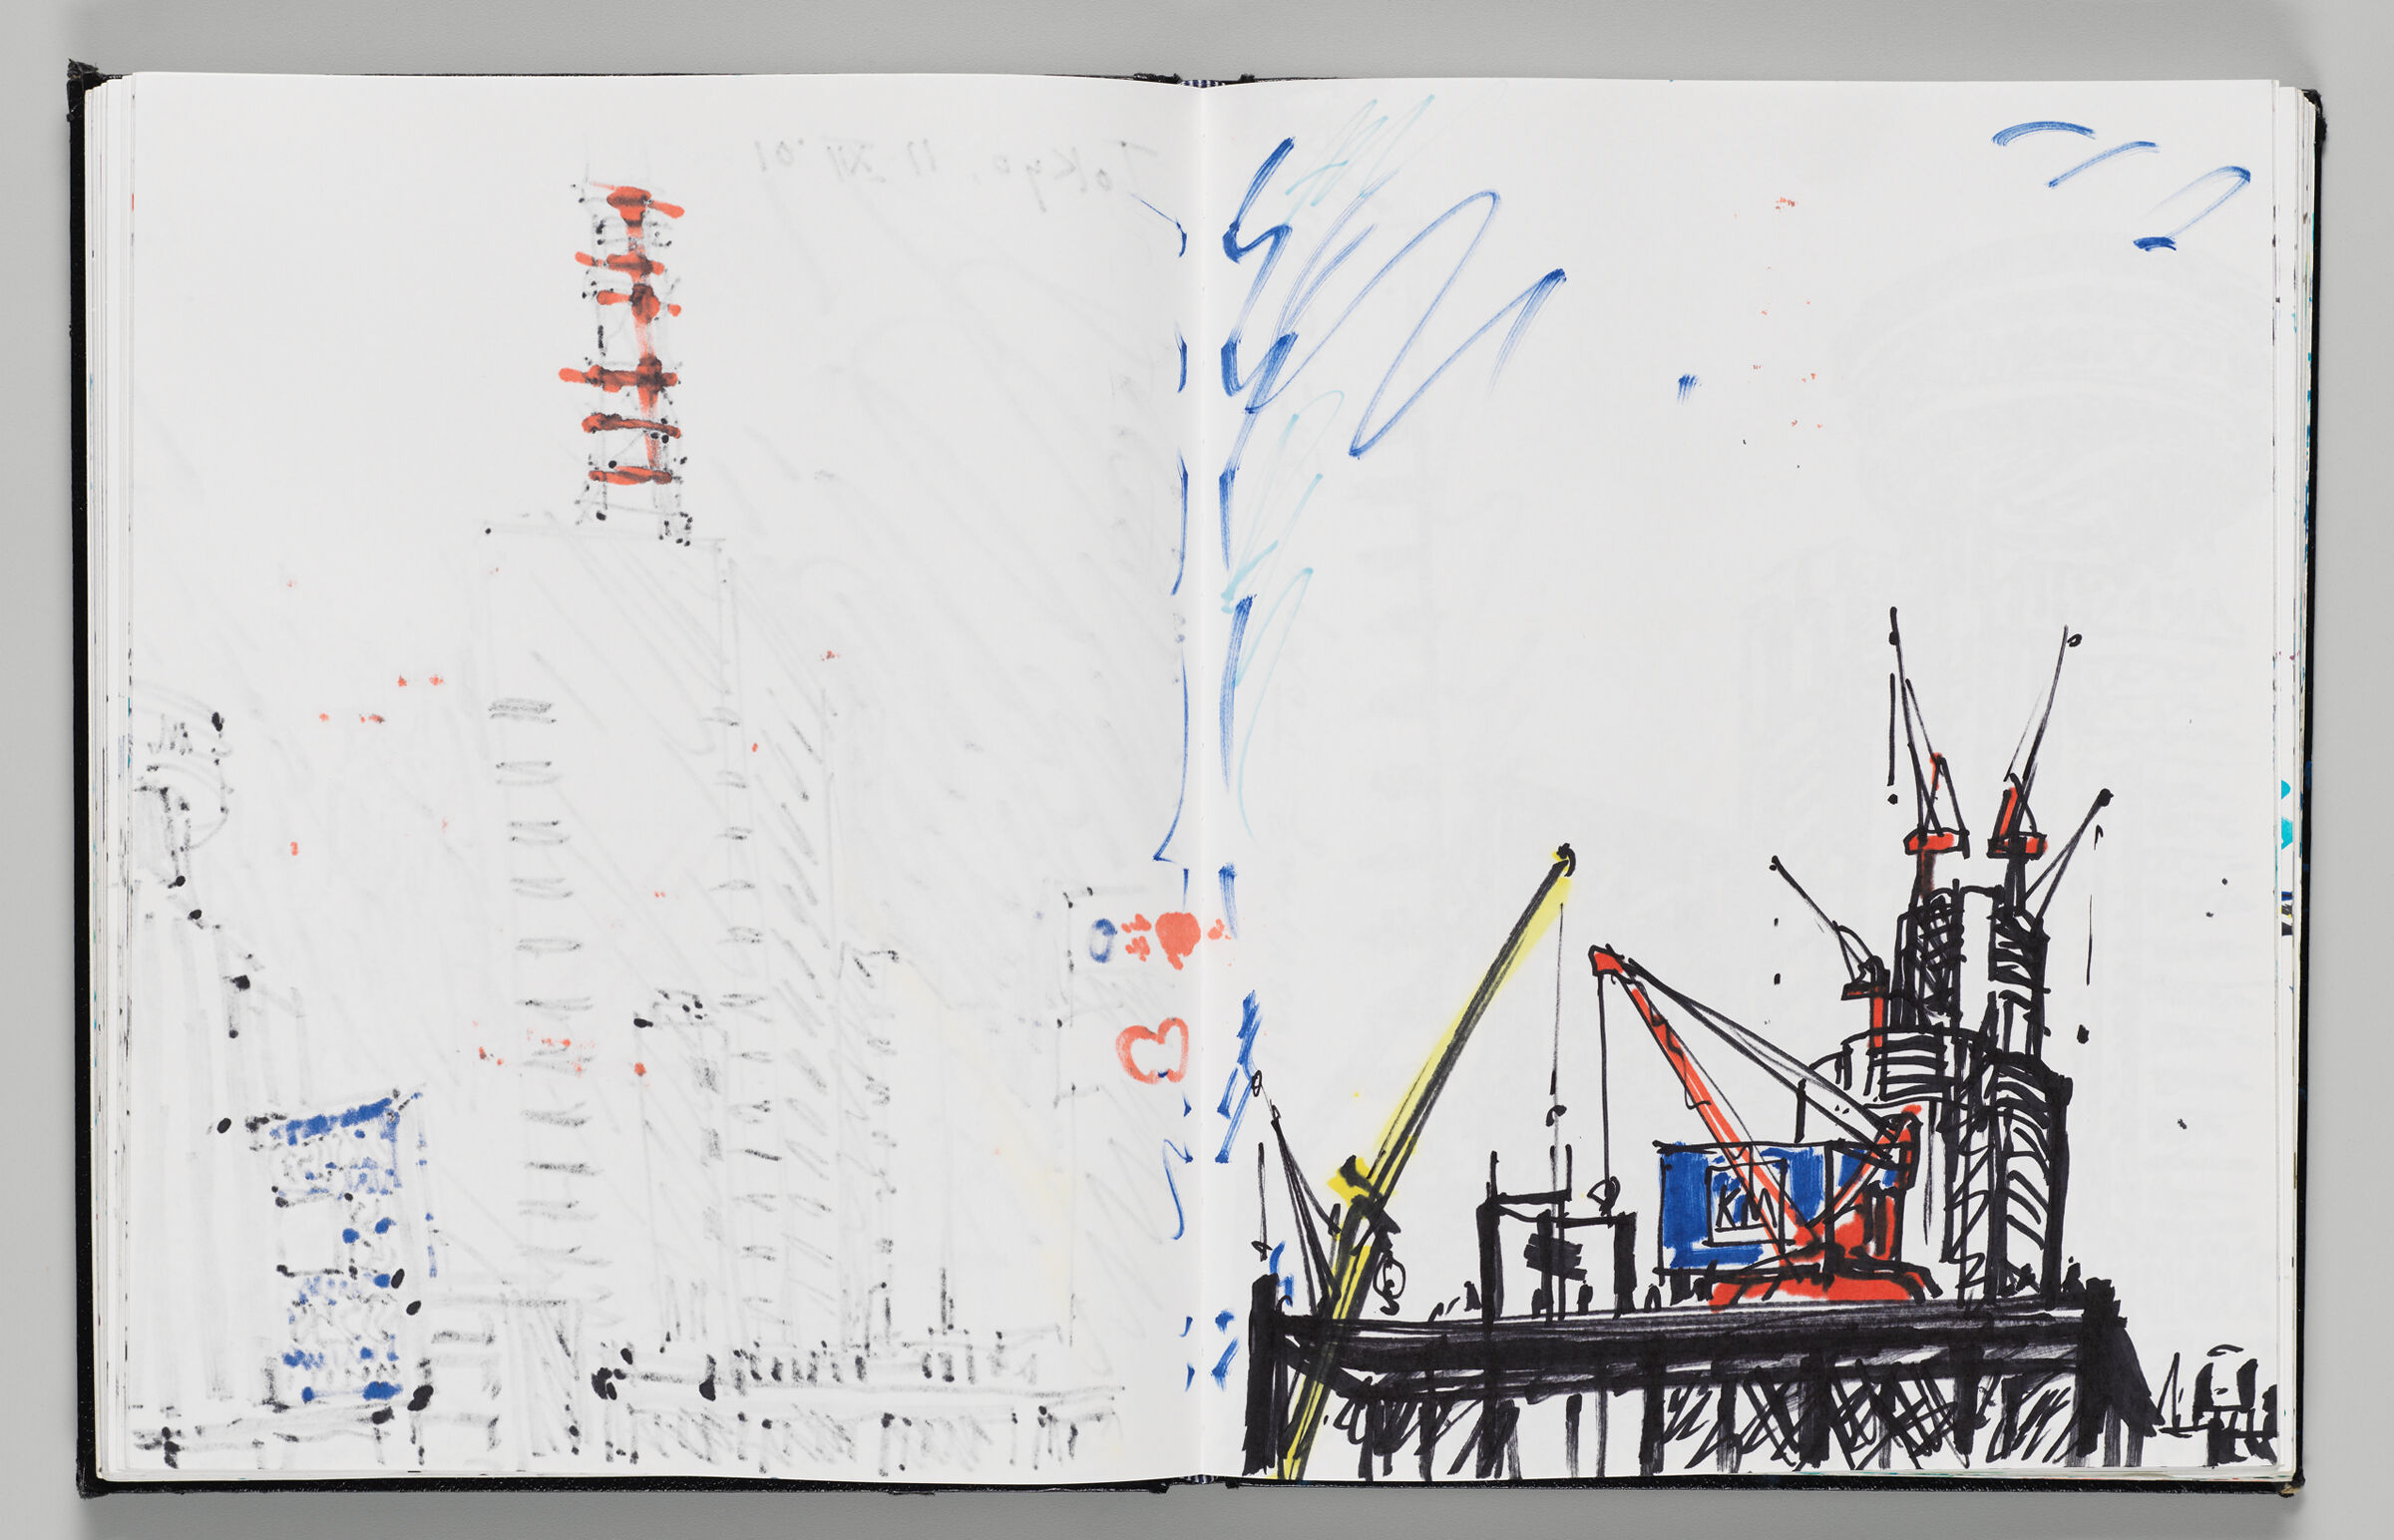 Untitled (Bleed-Through Of Previous Page, Left Page); Untitled (View Of Tokyo Construction, Right Page)